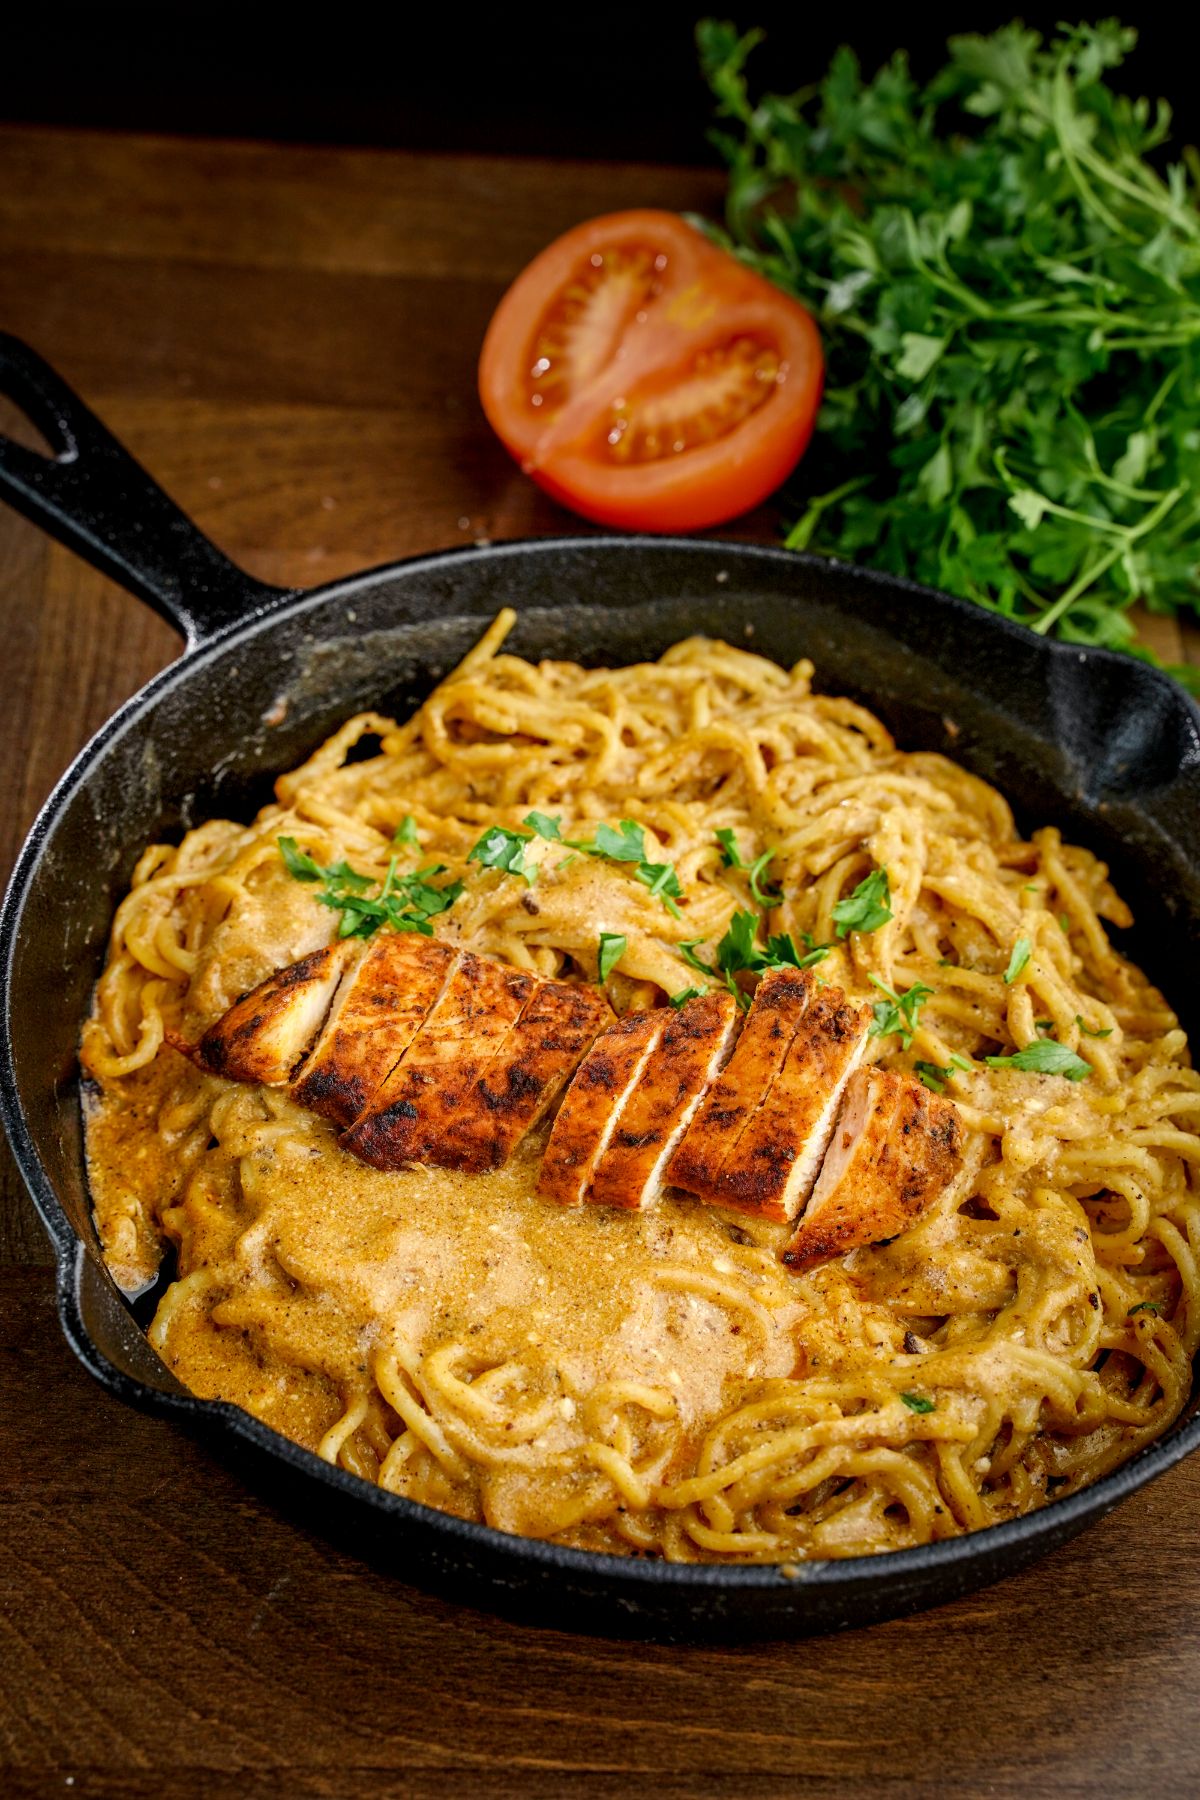 sliced tomato and herbs on table next to cast iron skillet of pasta with sliced chicken